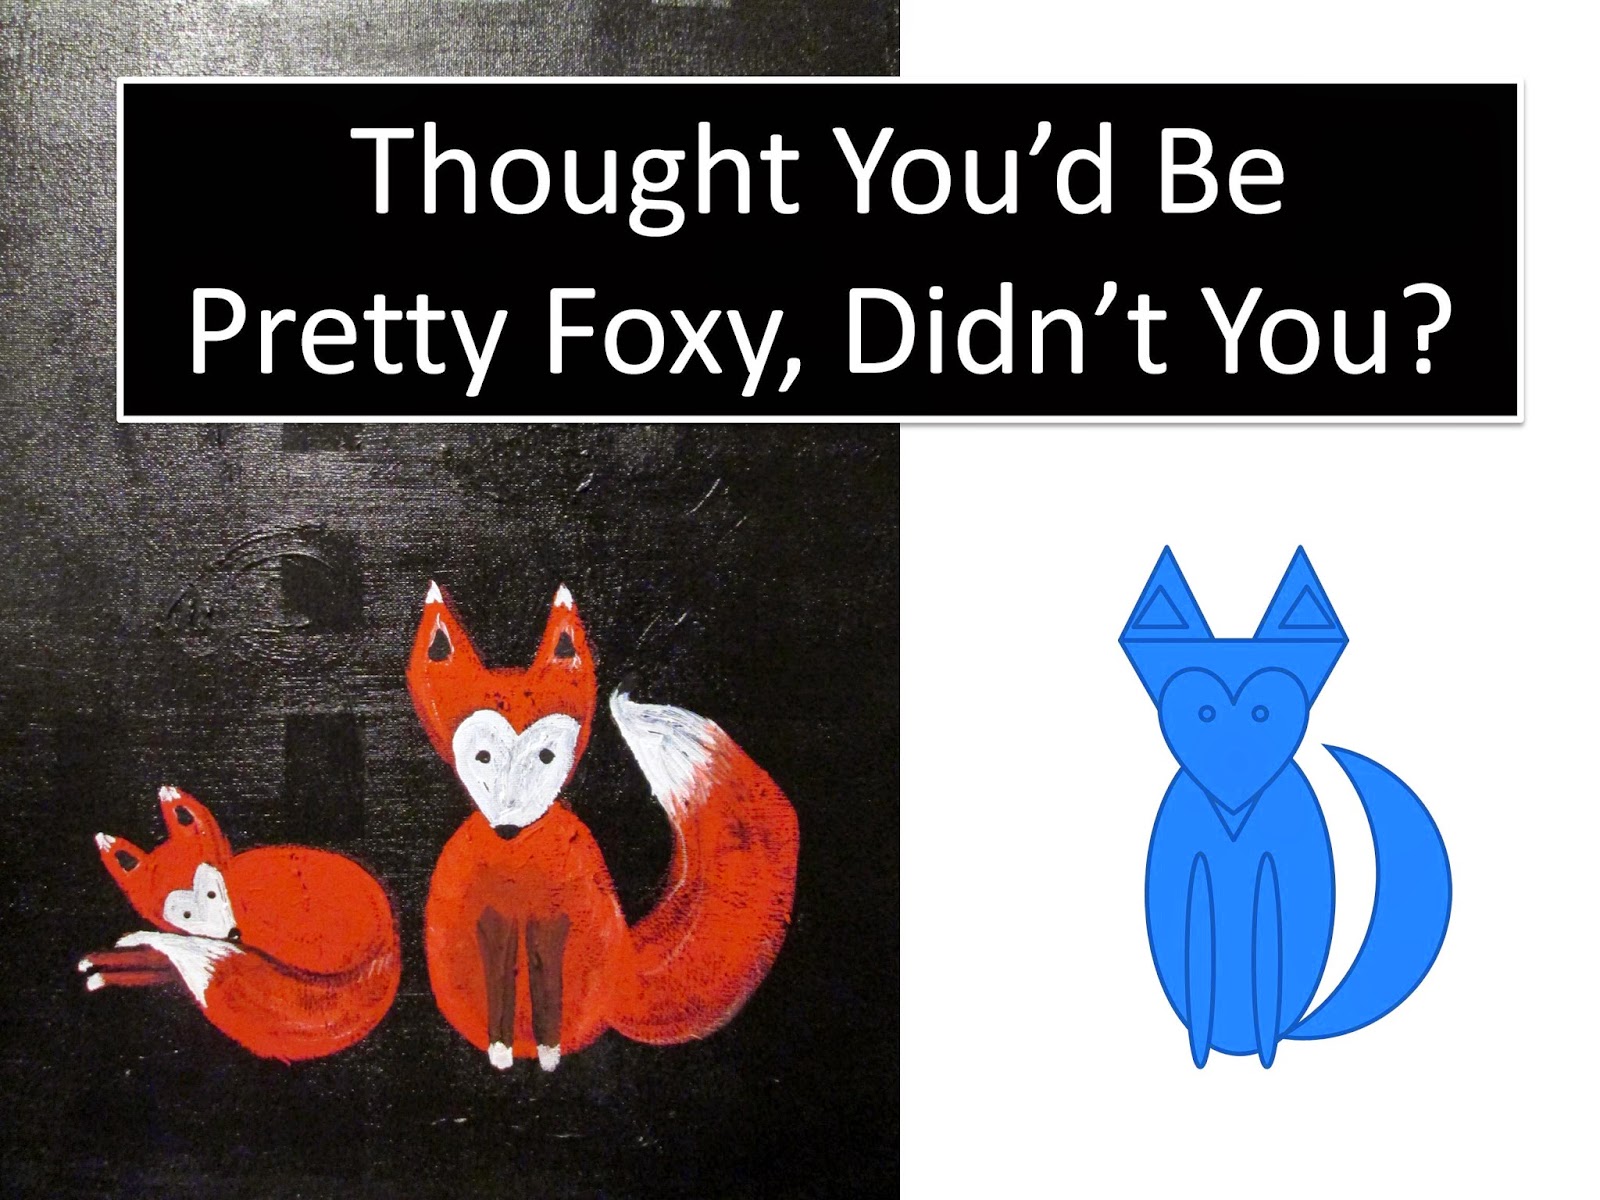 The breakdown of how to draw a fox based on the basic shapes.